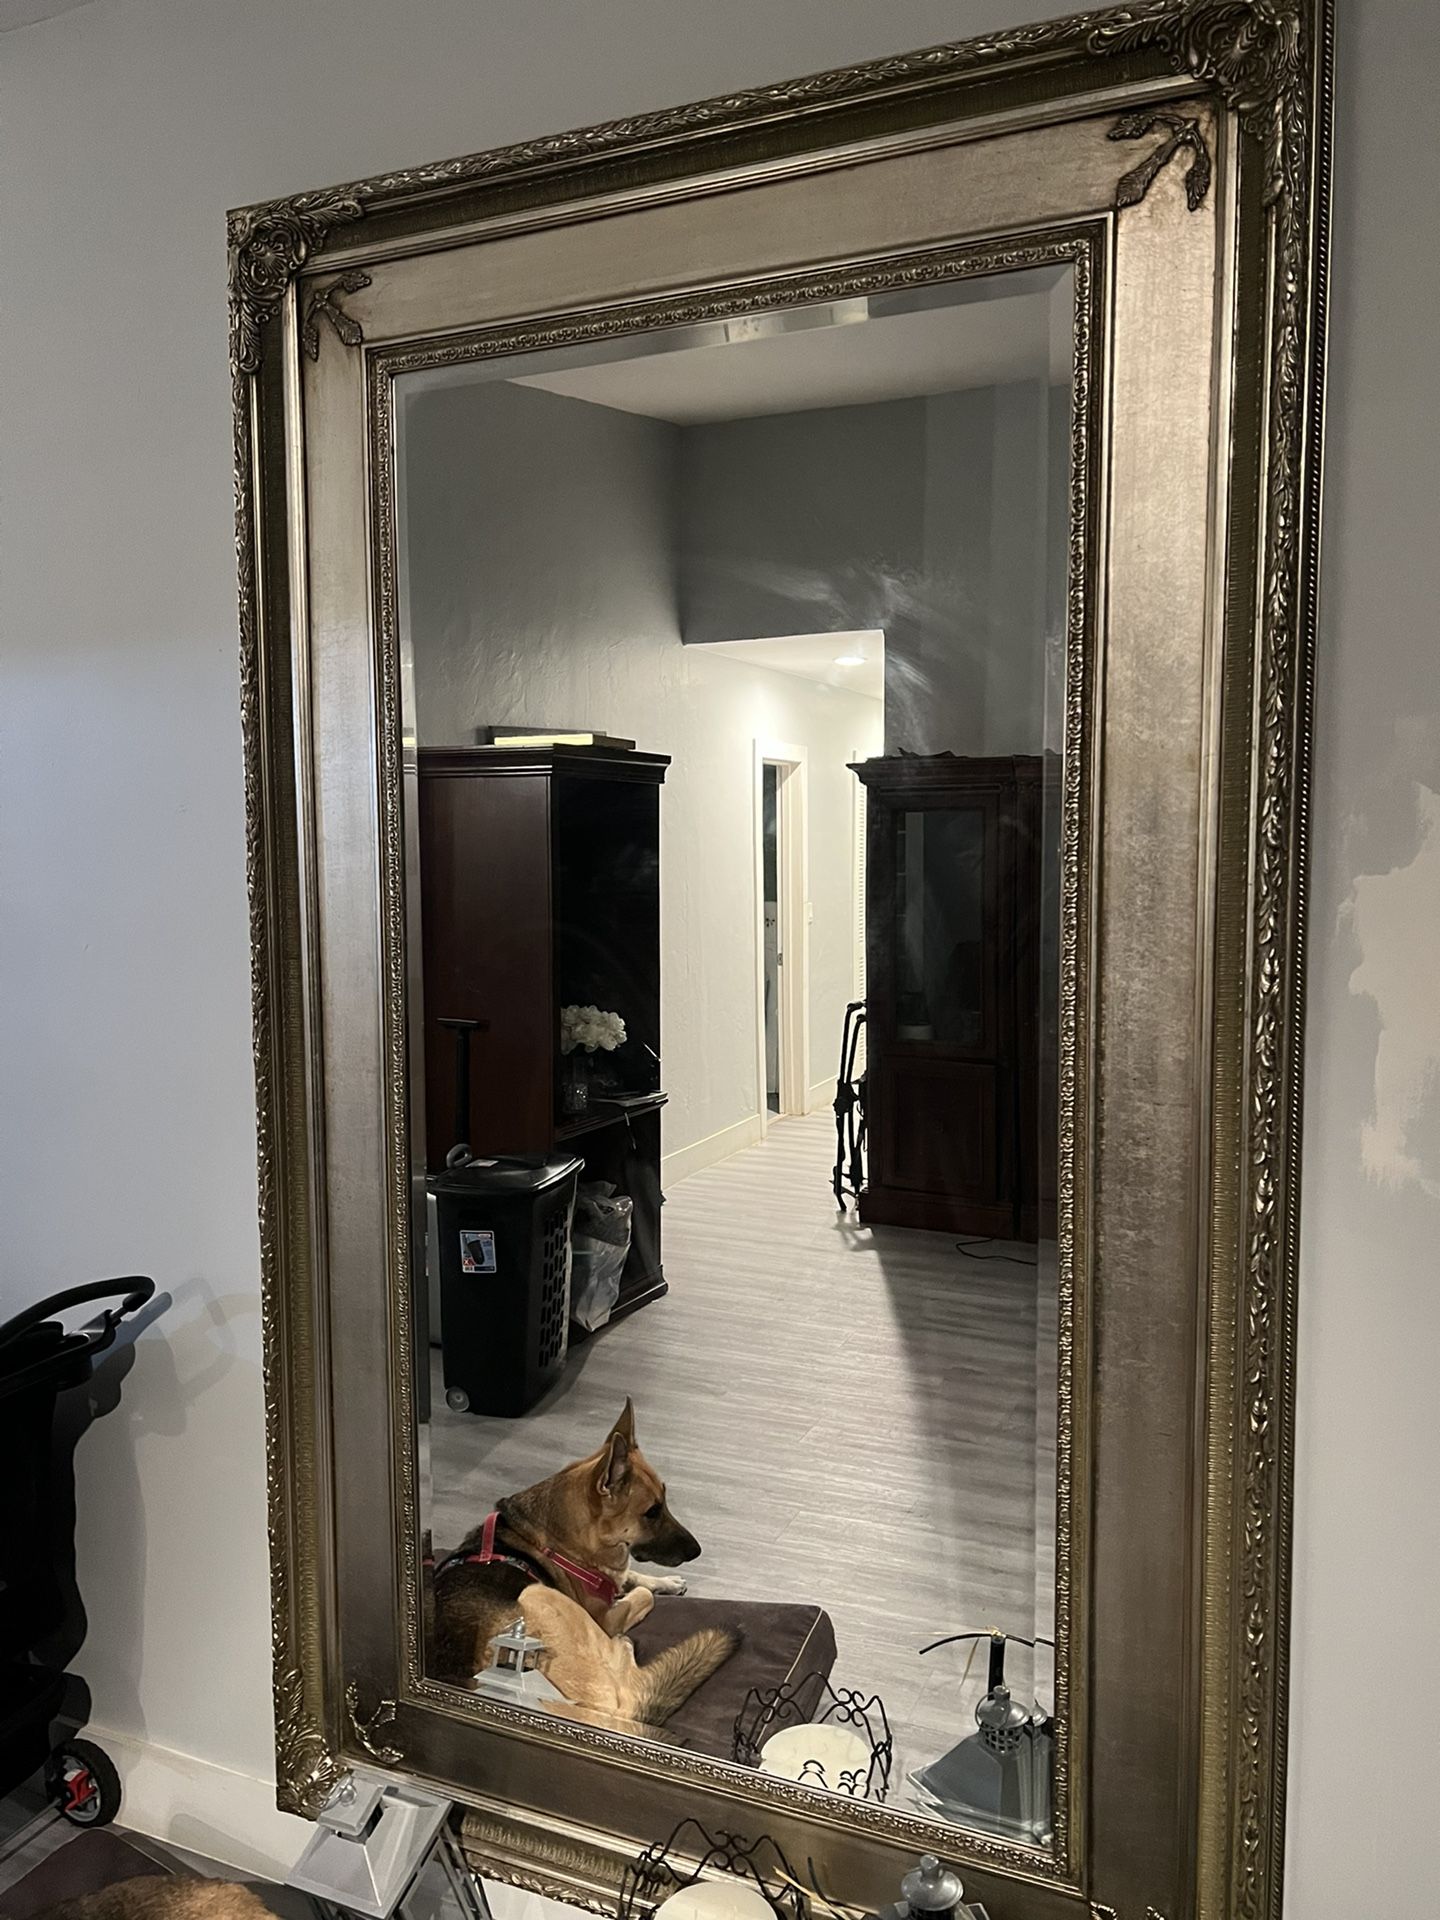 7 Foot Antique Mirror For Sale! Must Go!